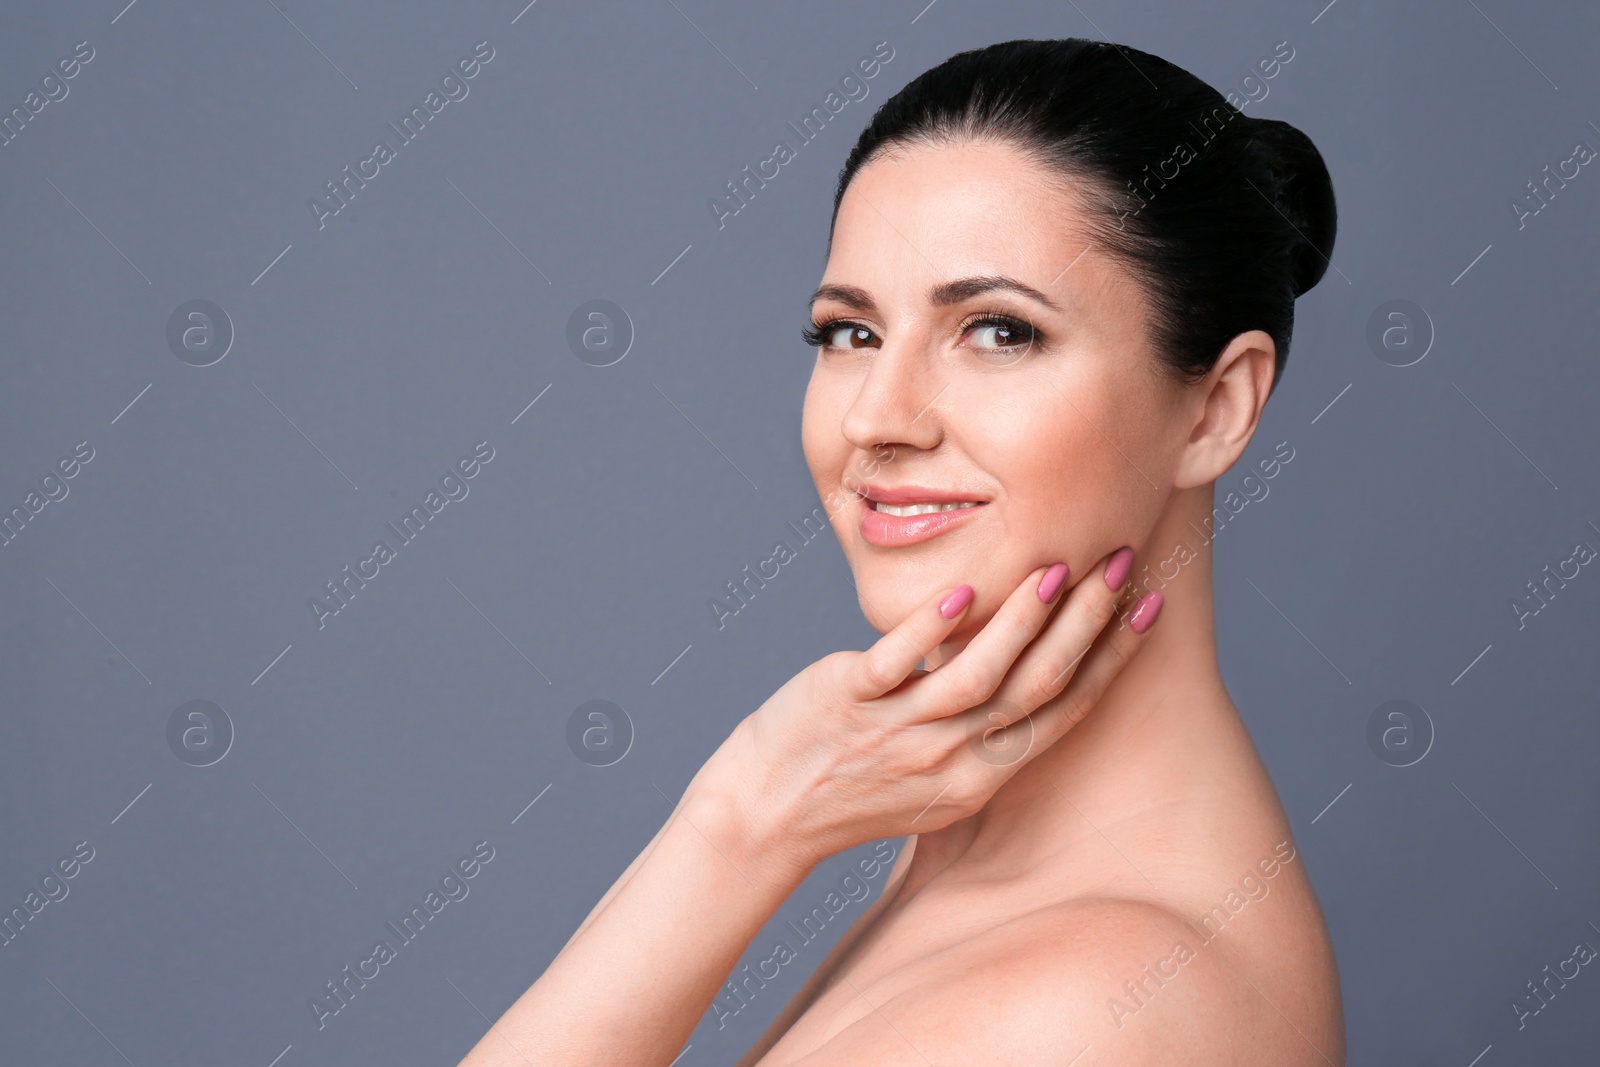 Photo of Beautiful woman with clean skin touching her face on grey background